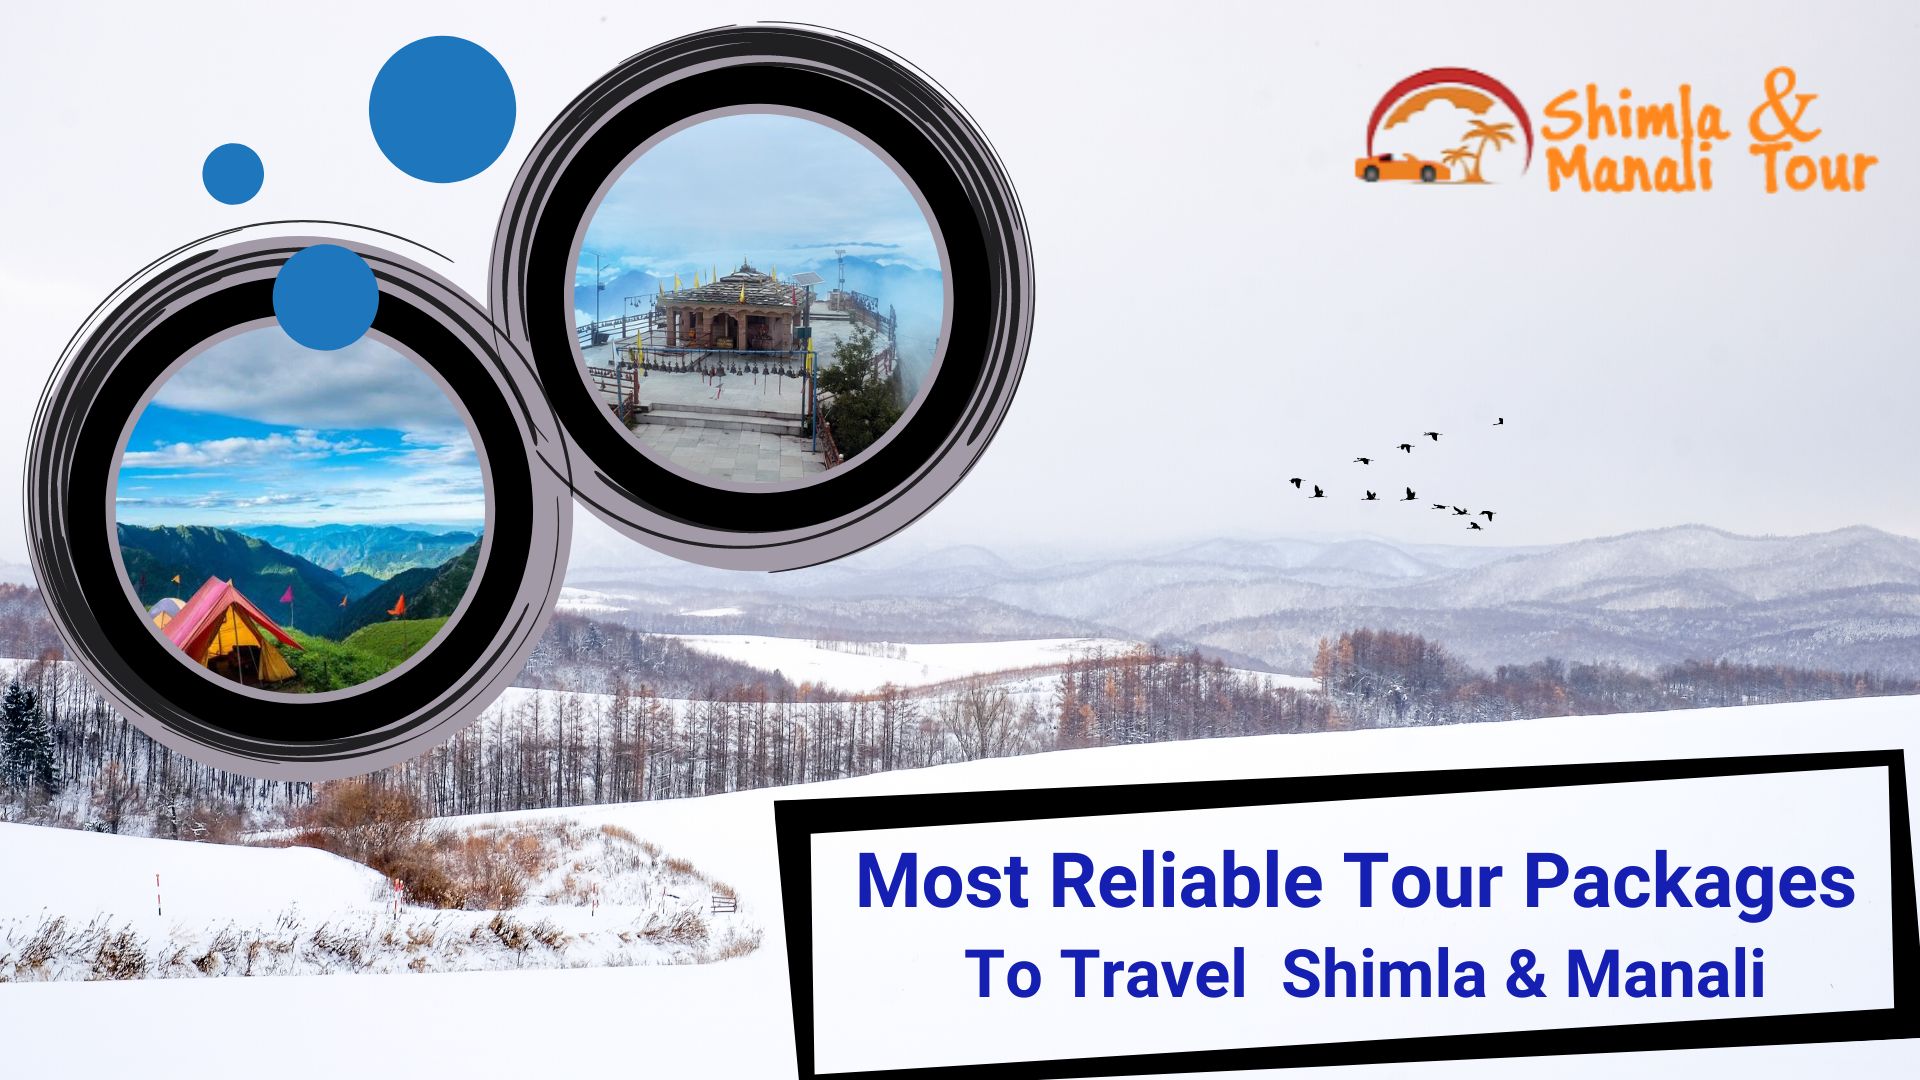 Most Reliable Tour Packages For Travel Shimla & Manali-42dbe6ce